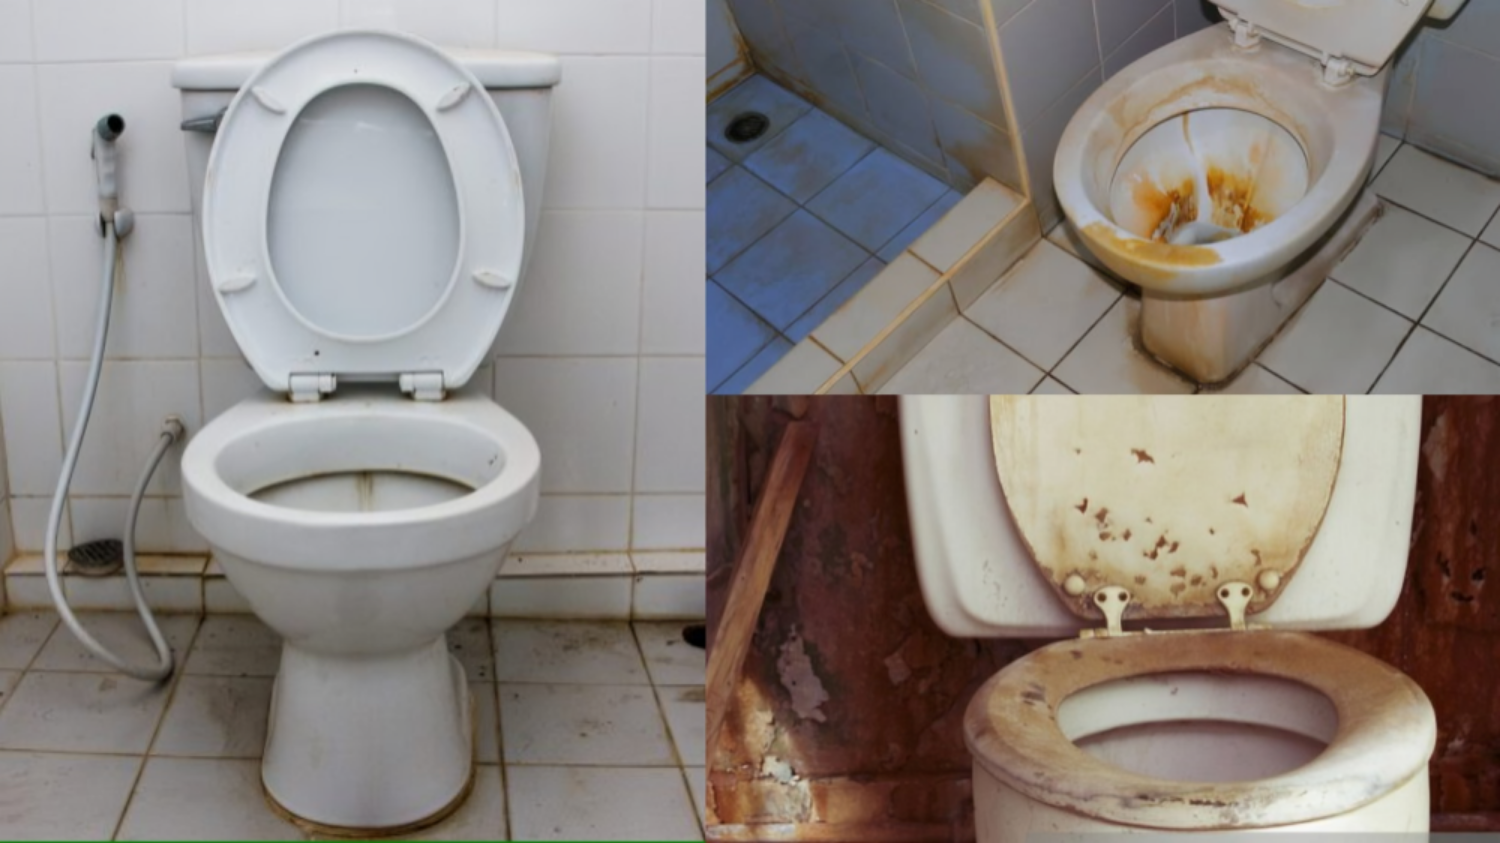 Have you ever put ENO in the toilet seat? Know what happens after inserting ENO की तस्वीर